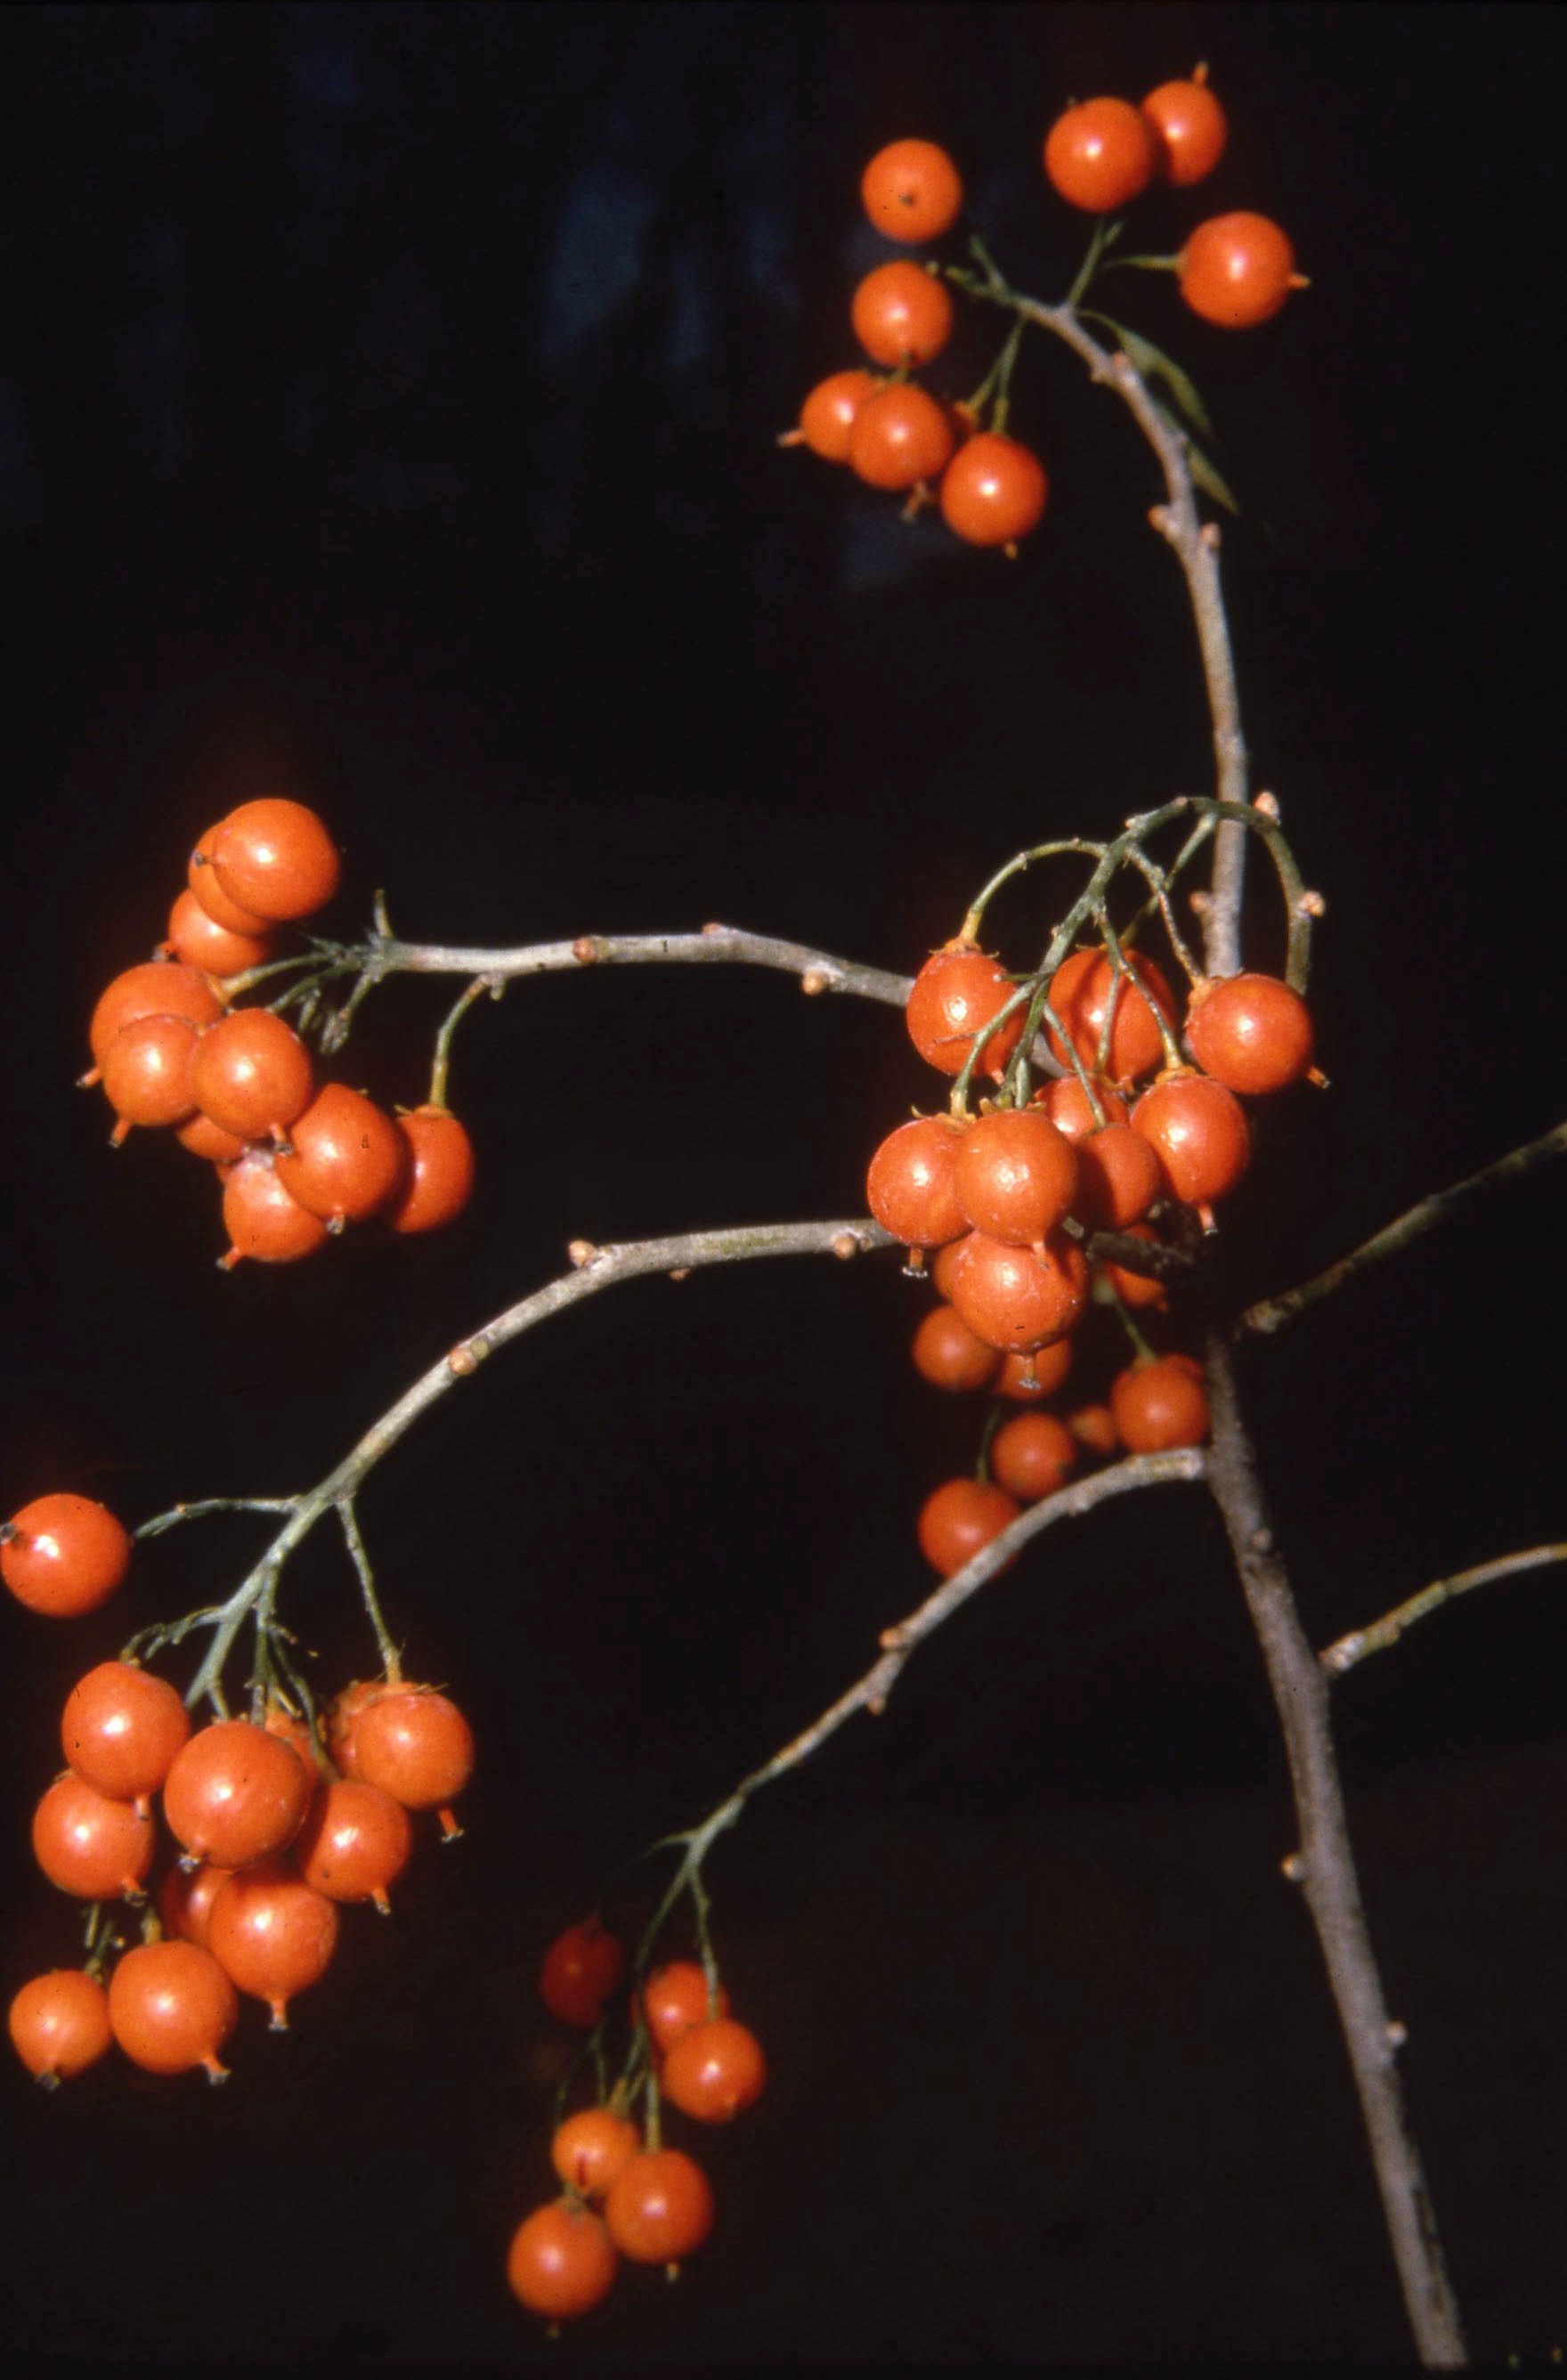 The Scientific Name is Celastrus scandens. You will likely hear them called American Bittersweet. This picture shows the Ripe fruit of Celastrus scandens